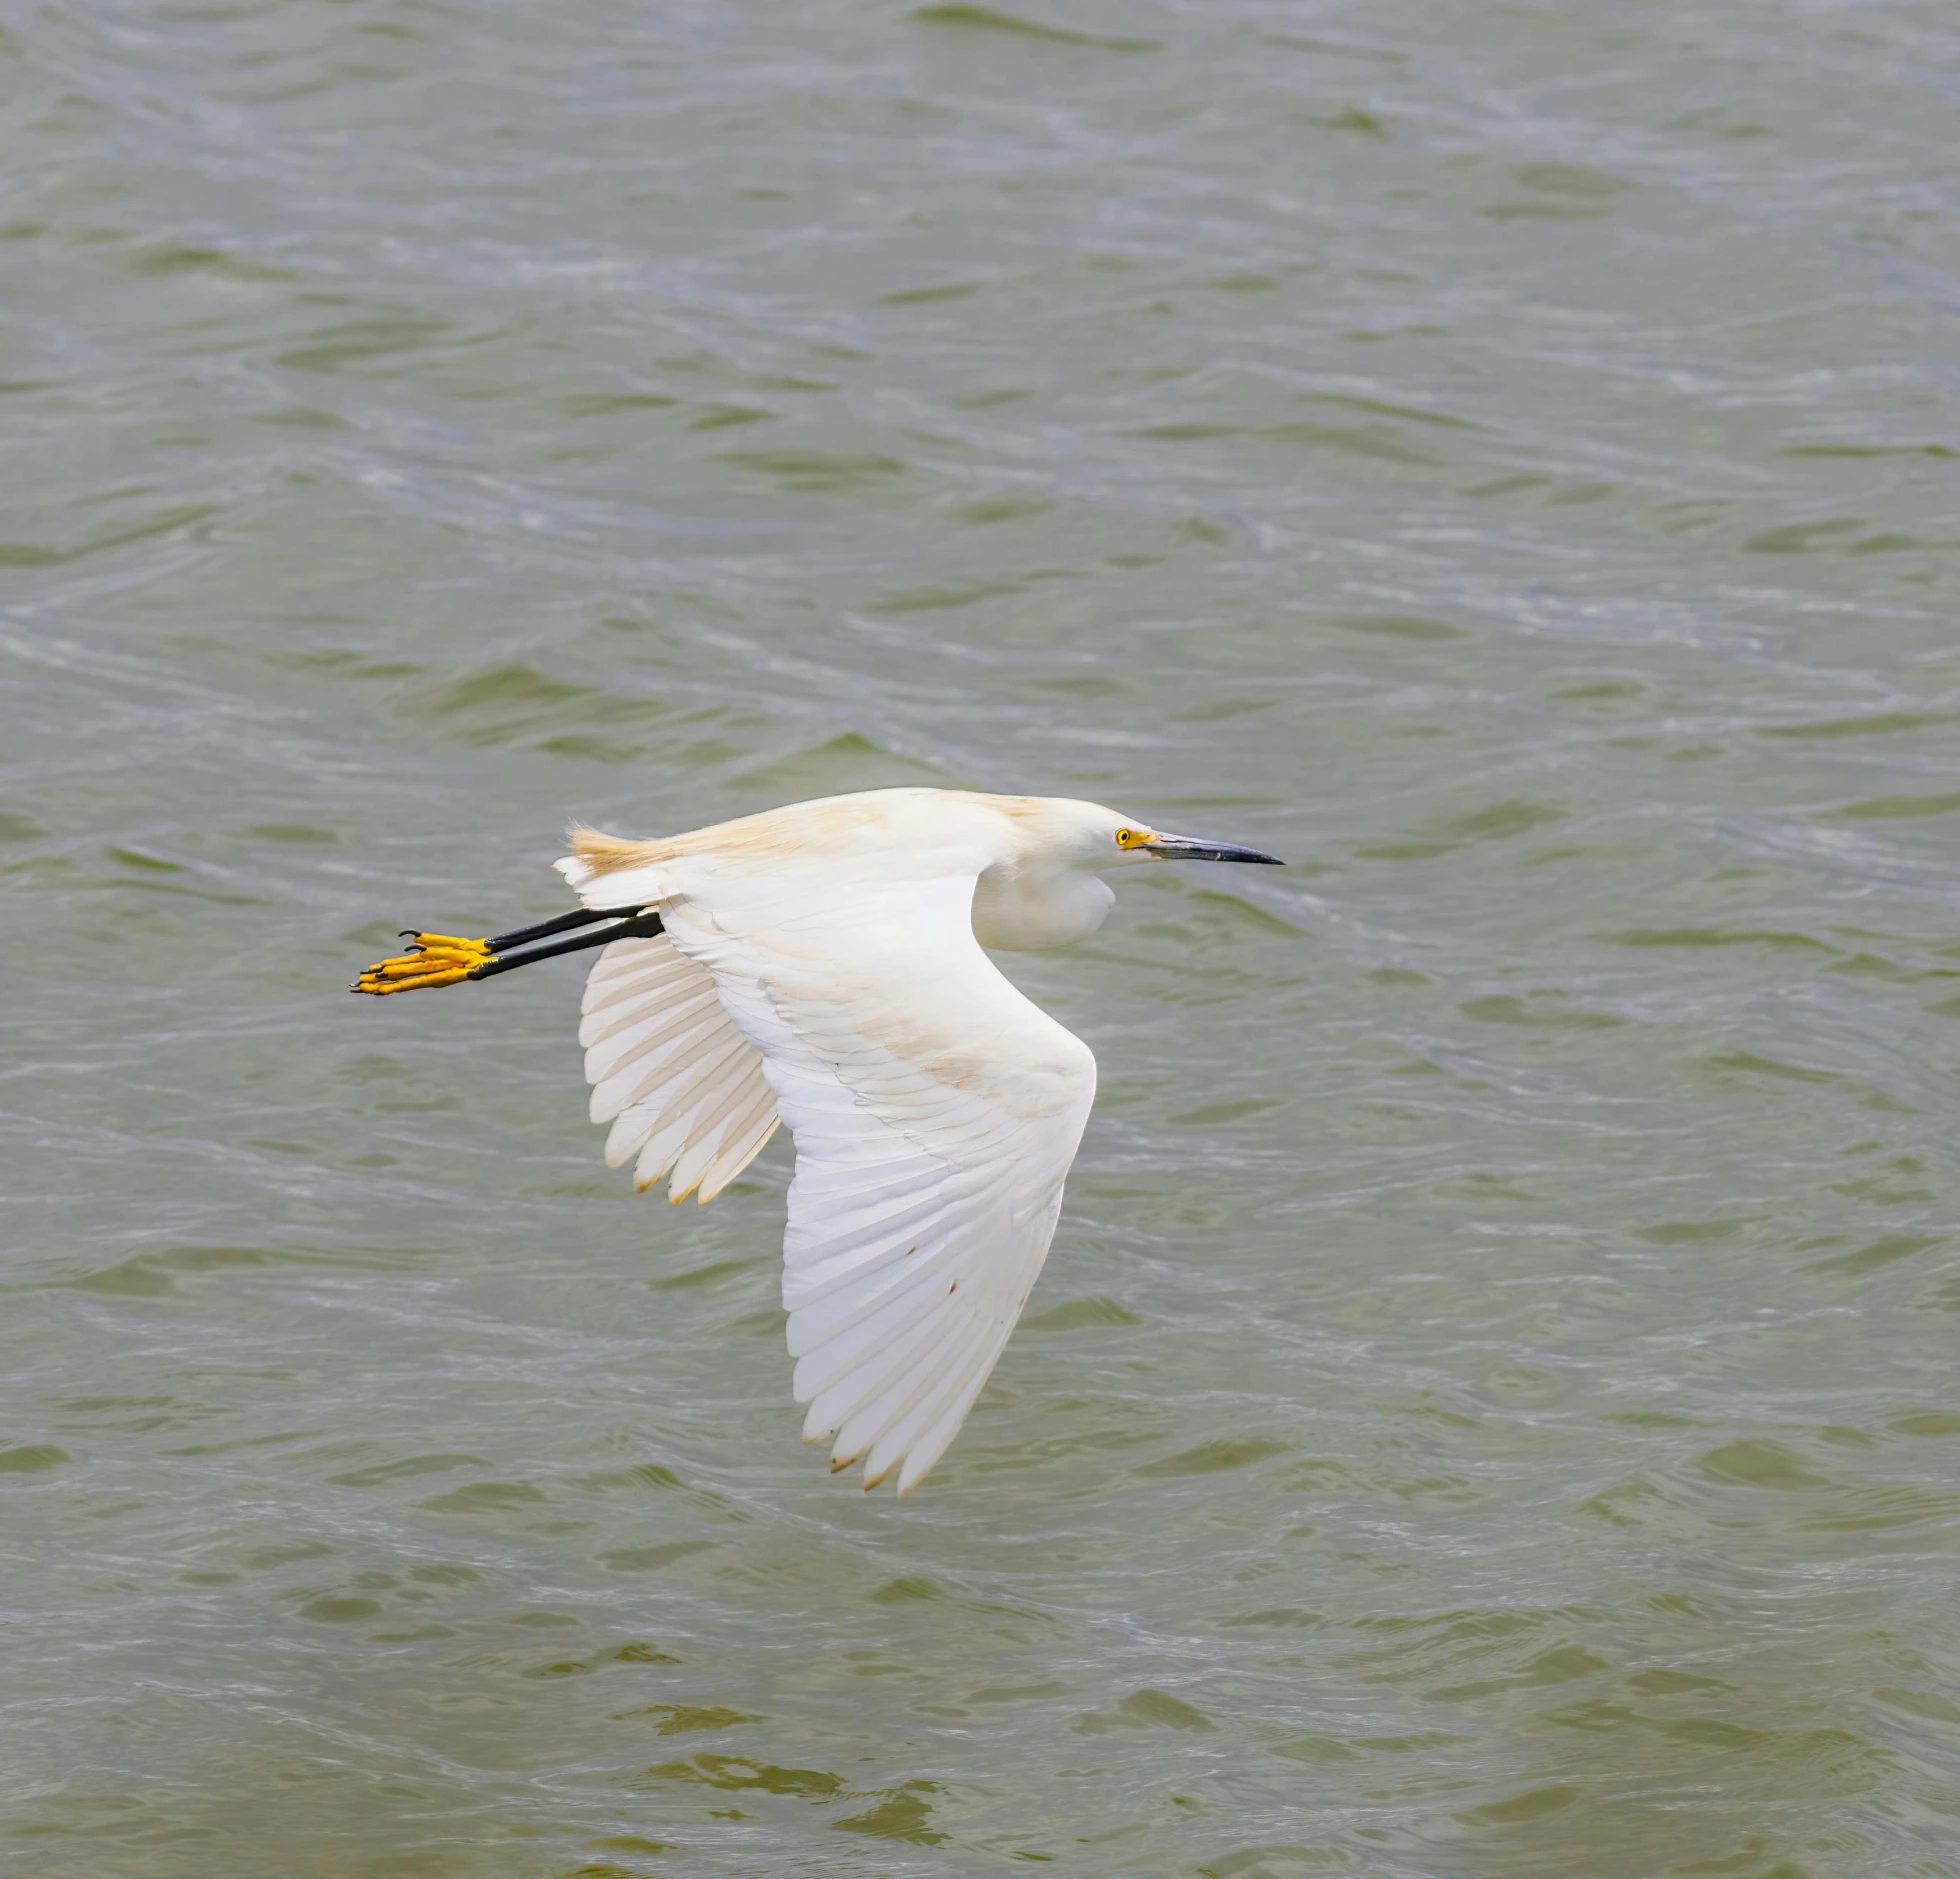 a white bird flying above a body of water